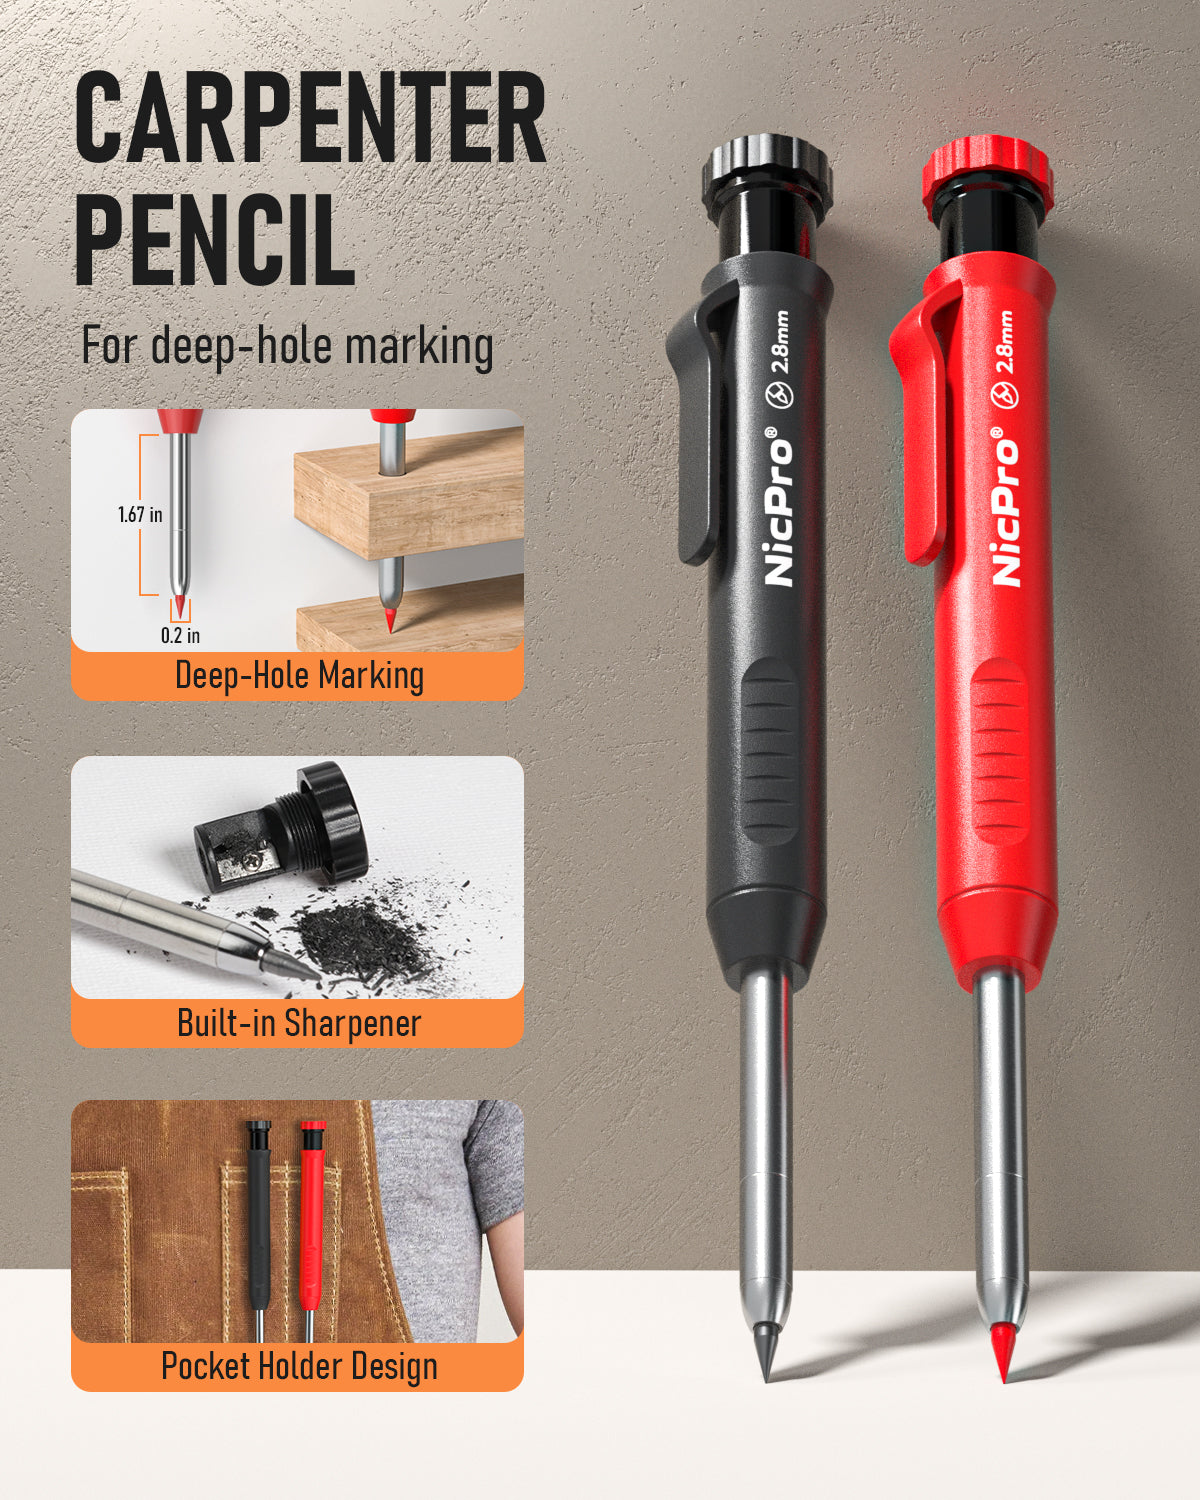 Nicpro Carpenter Pencil with Sharpener, Mechanical Pencils Set with 26 Refills, Deep Hole Marker for Construction, Heavy Duty Woodworking Pencils for Architect (Black, Red) - With Case